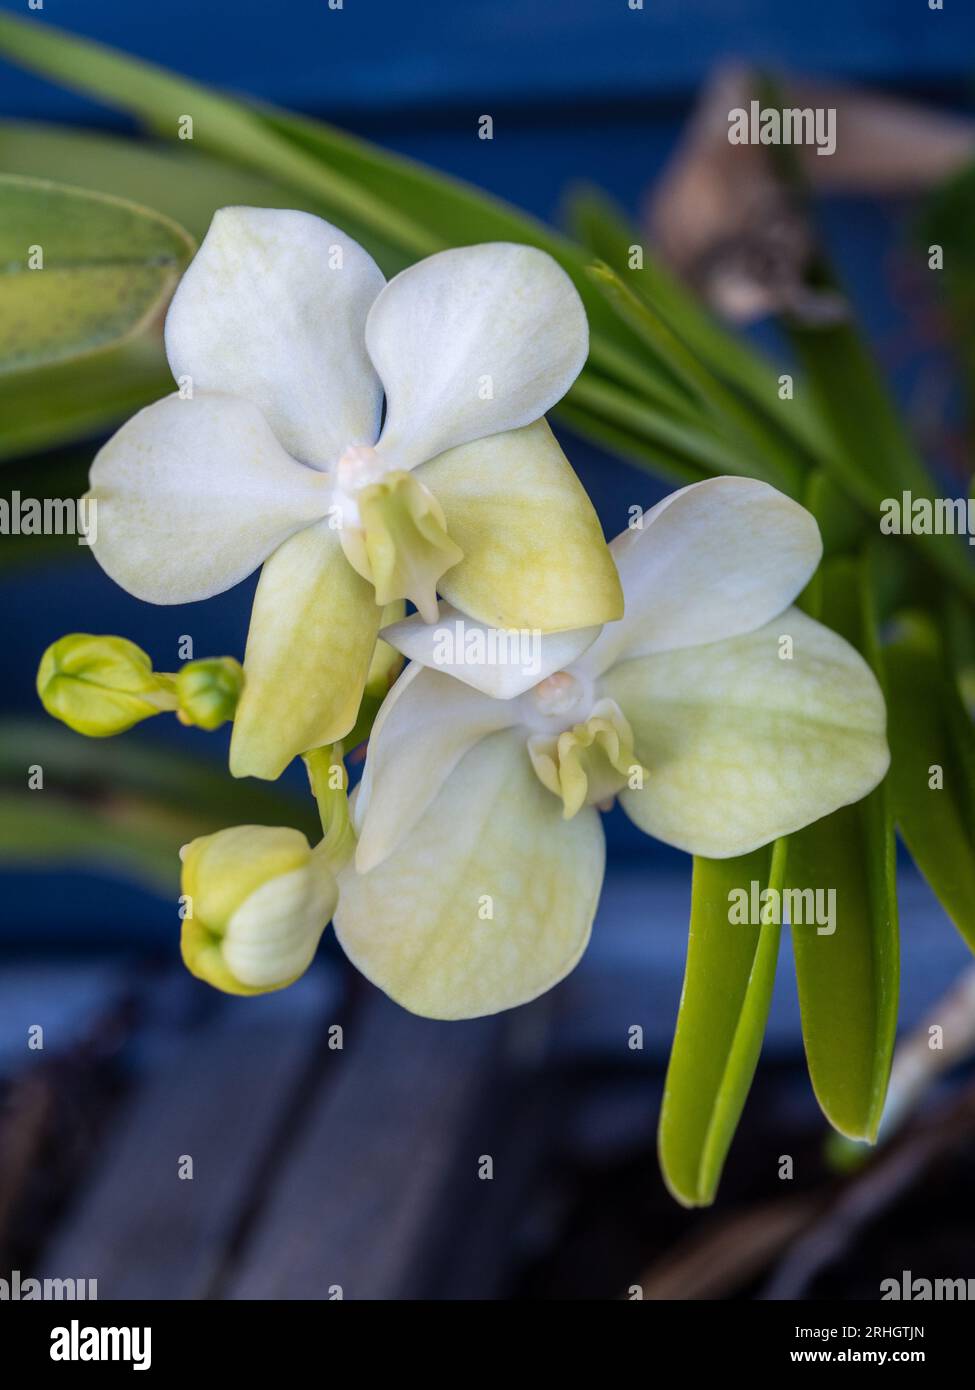 Vanda Orchid flowers and buds ‘Princess Mikaela White’ , lemon yellow on bottom petals, green Strapy leaves Stock Photo